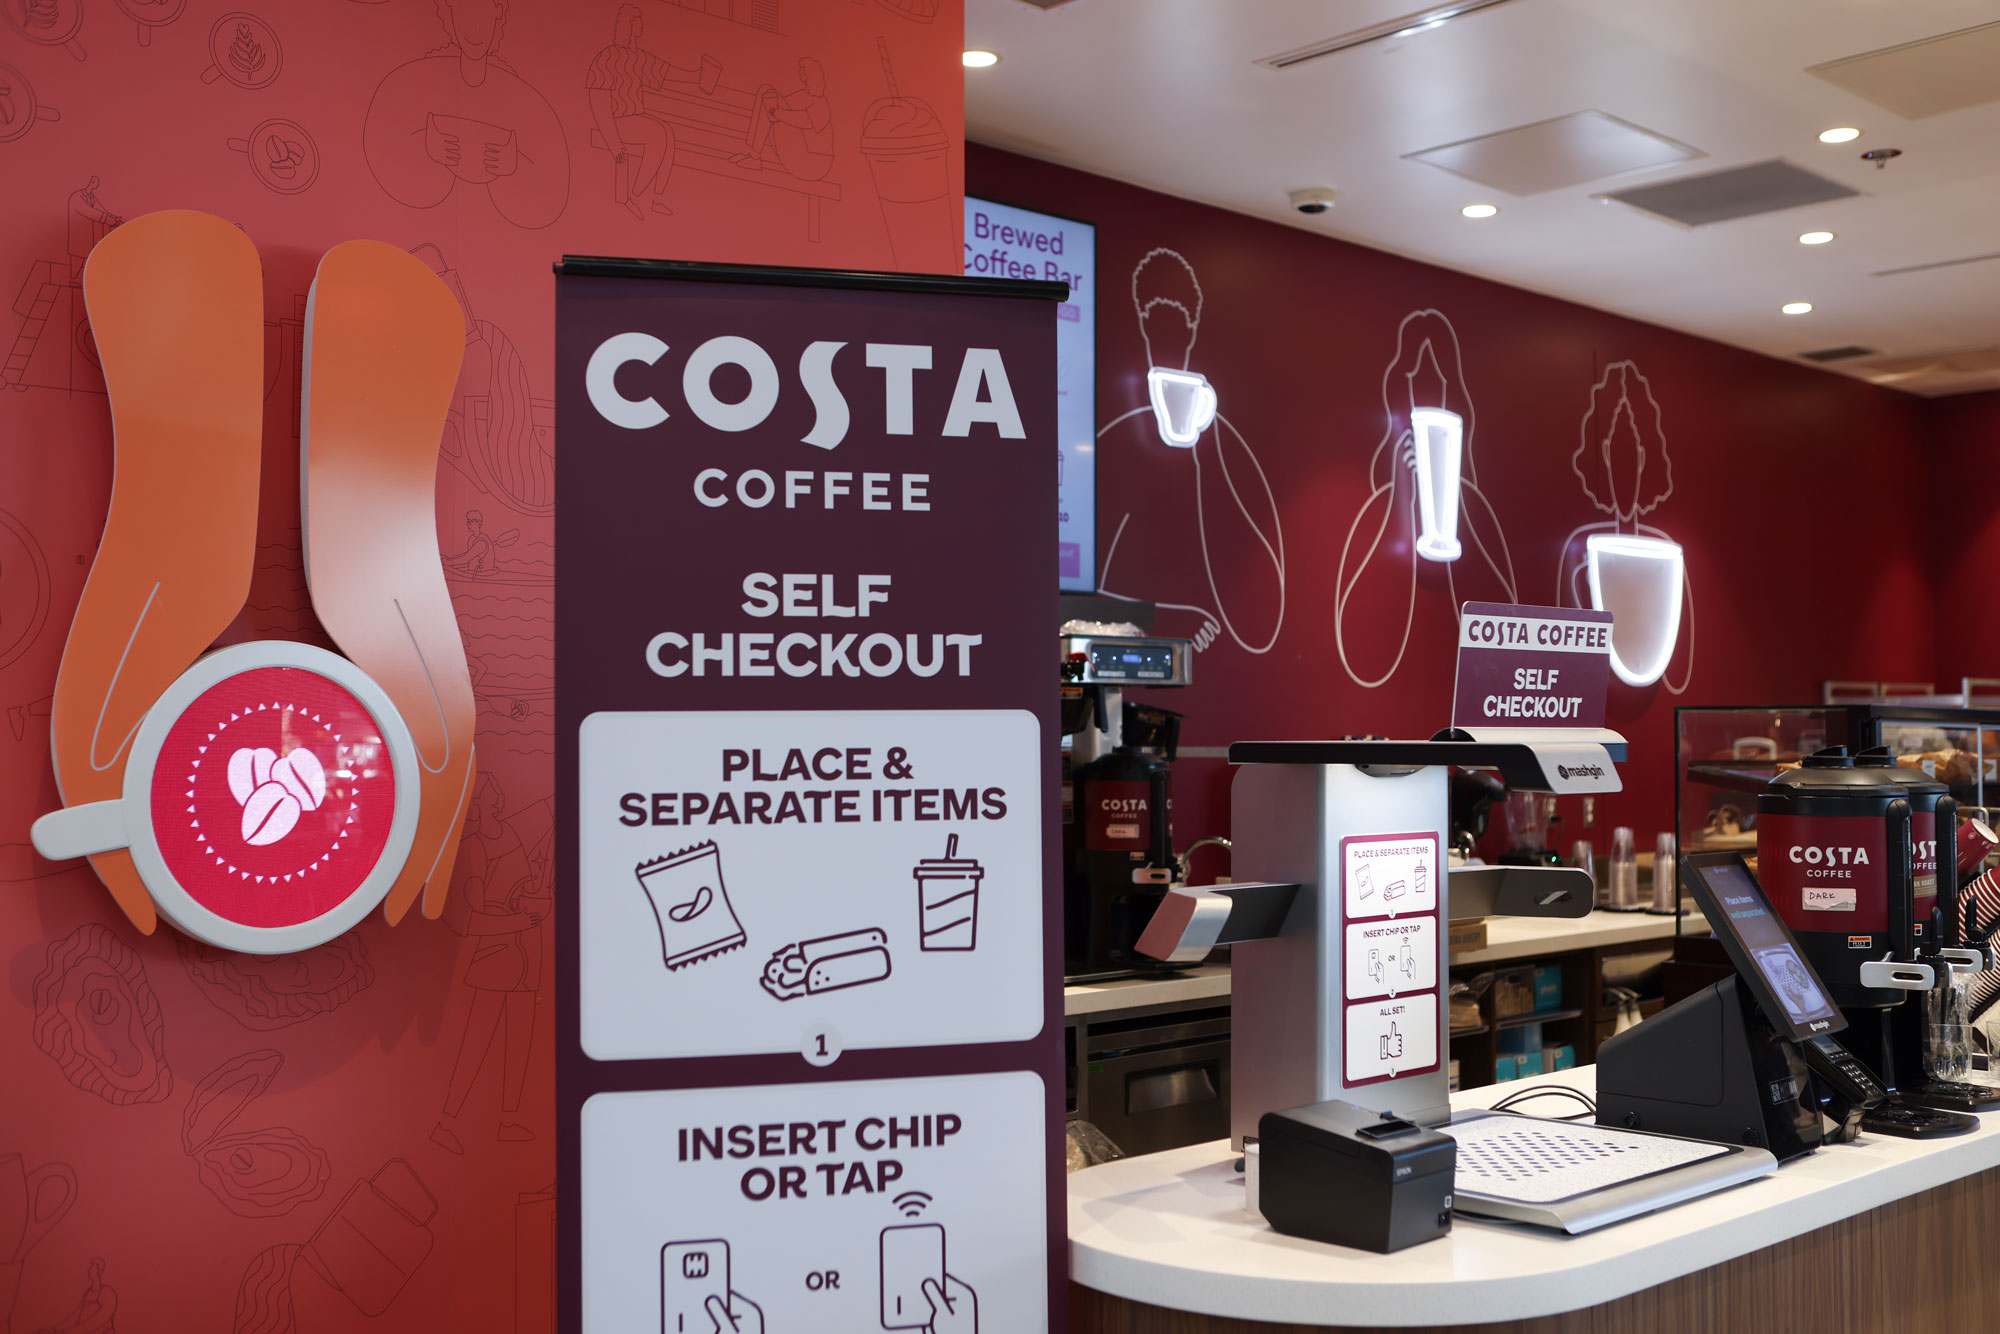 SEA Costa Coffee with self checkout